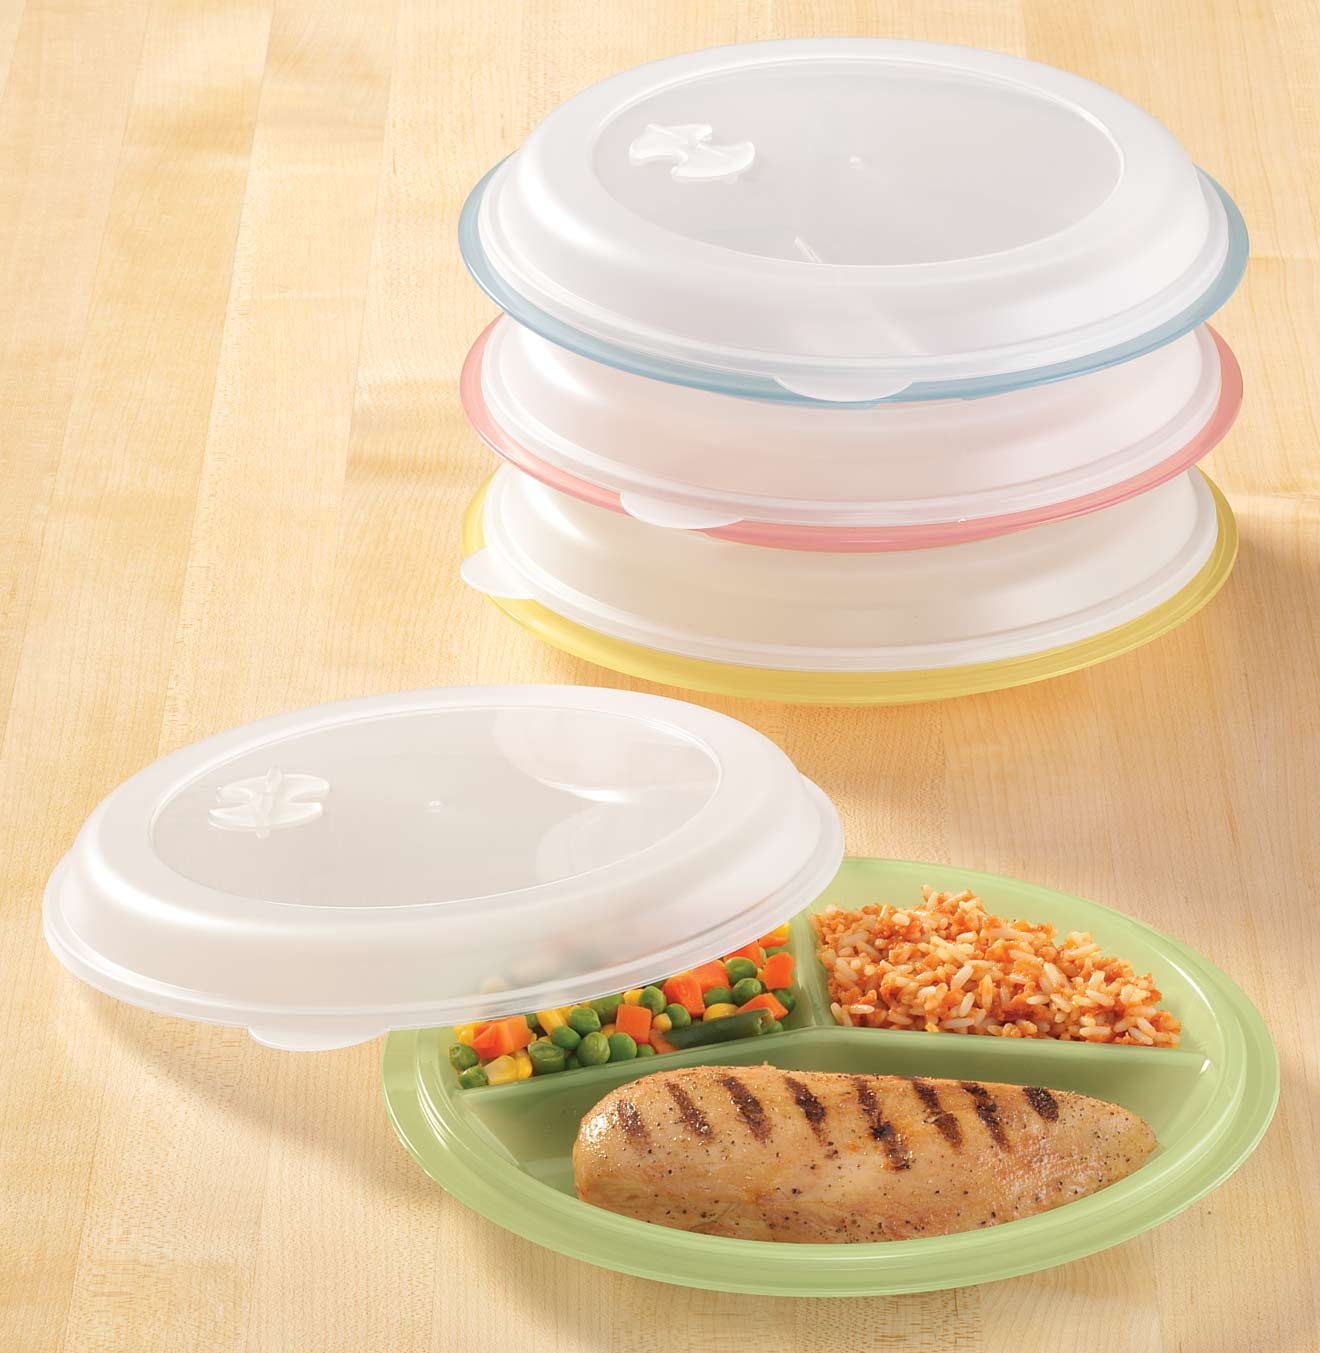 Microwavable Divided Dinner Plates With Lids – BestMicrowave